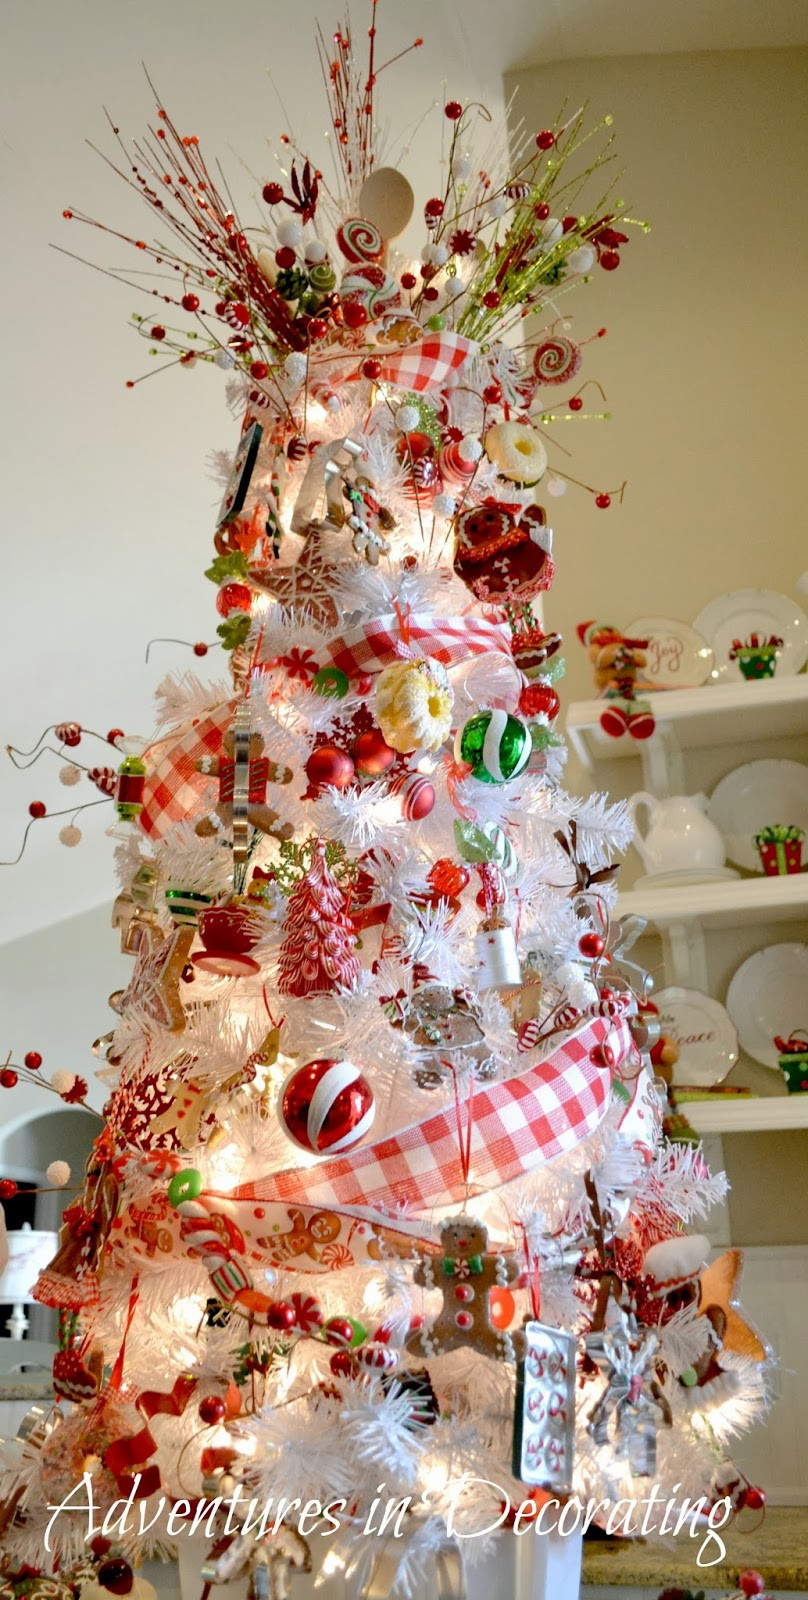 Kitchen Christmas Tree
 Adventures in Decorating Our Christmas Great Room and